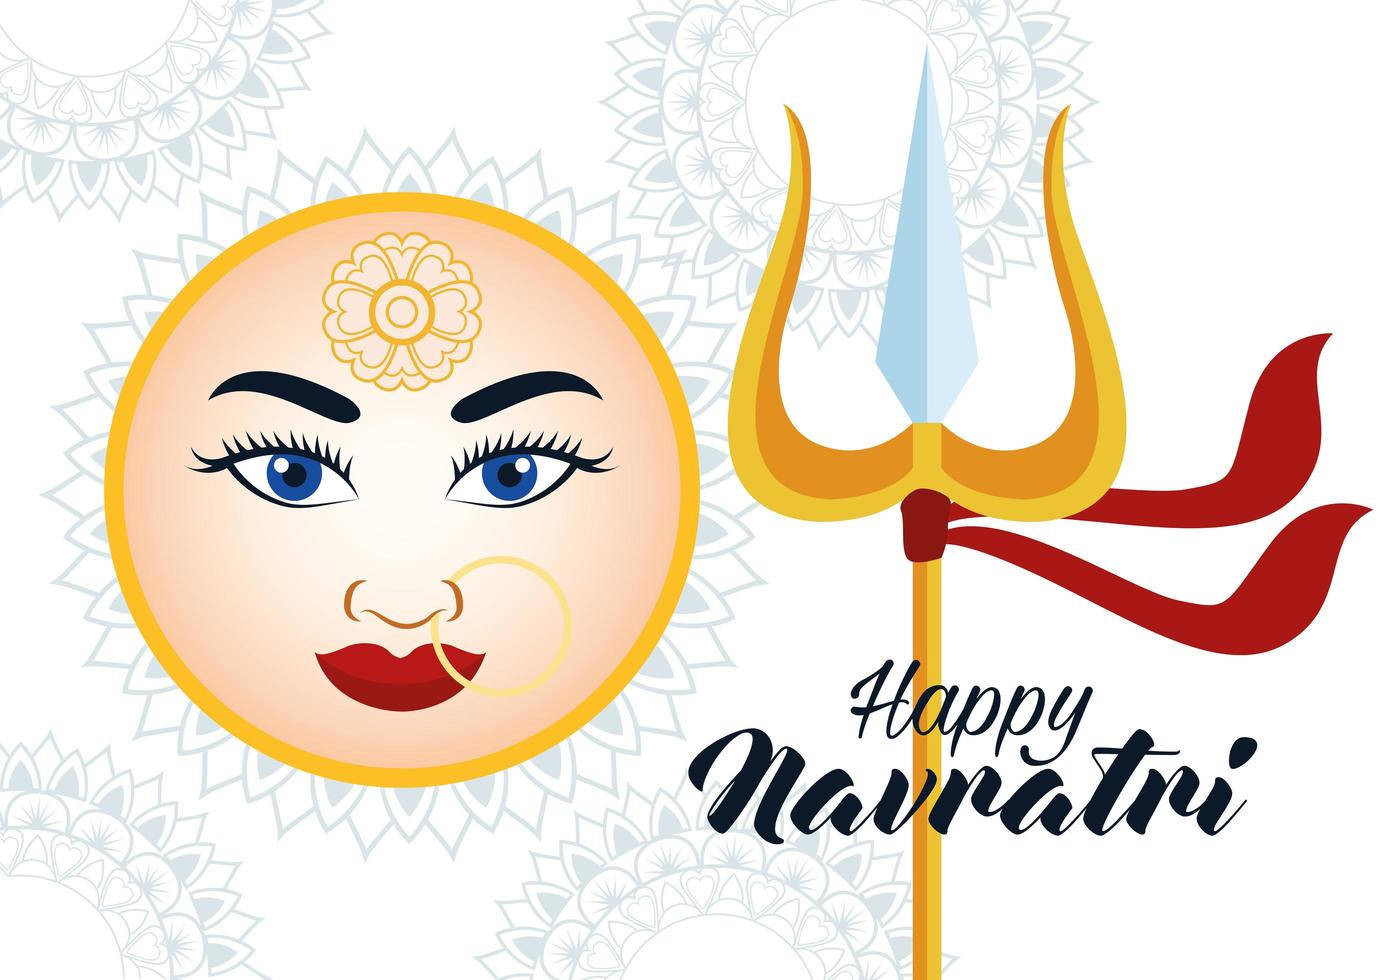 happy navratri celebration card with beautiful goddess face and trident vector